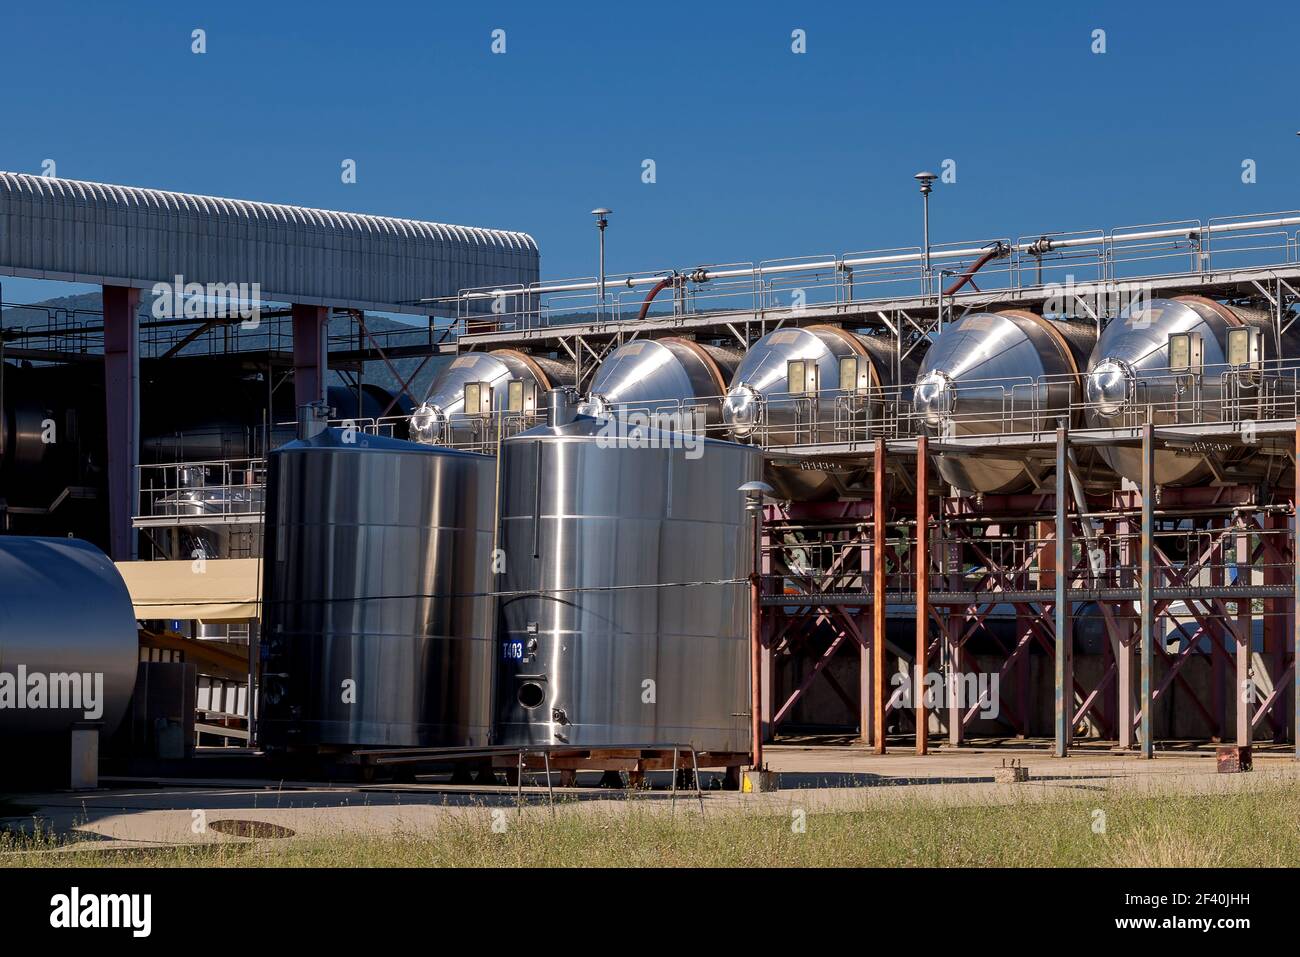 Winery With Stainless Steel Tanks Stock Photo